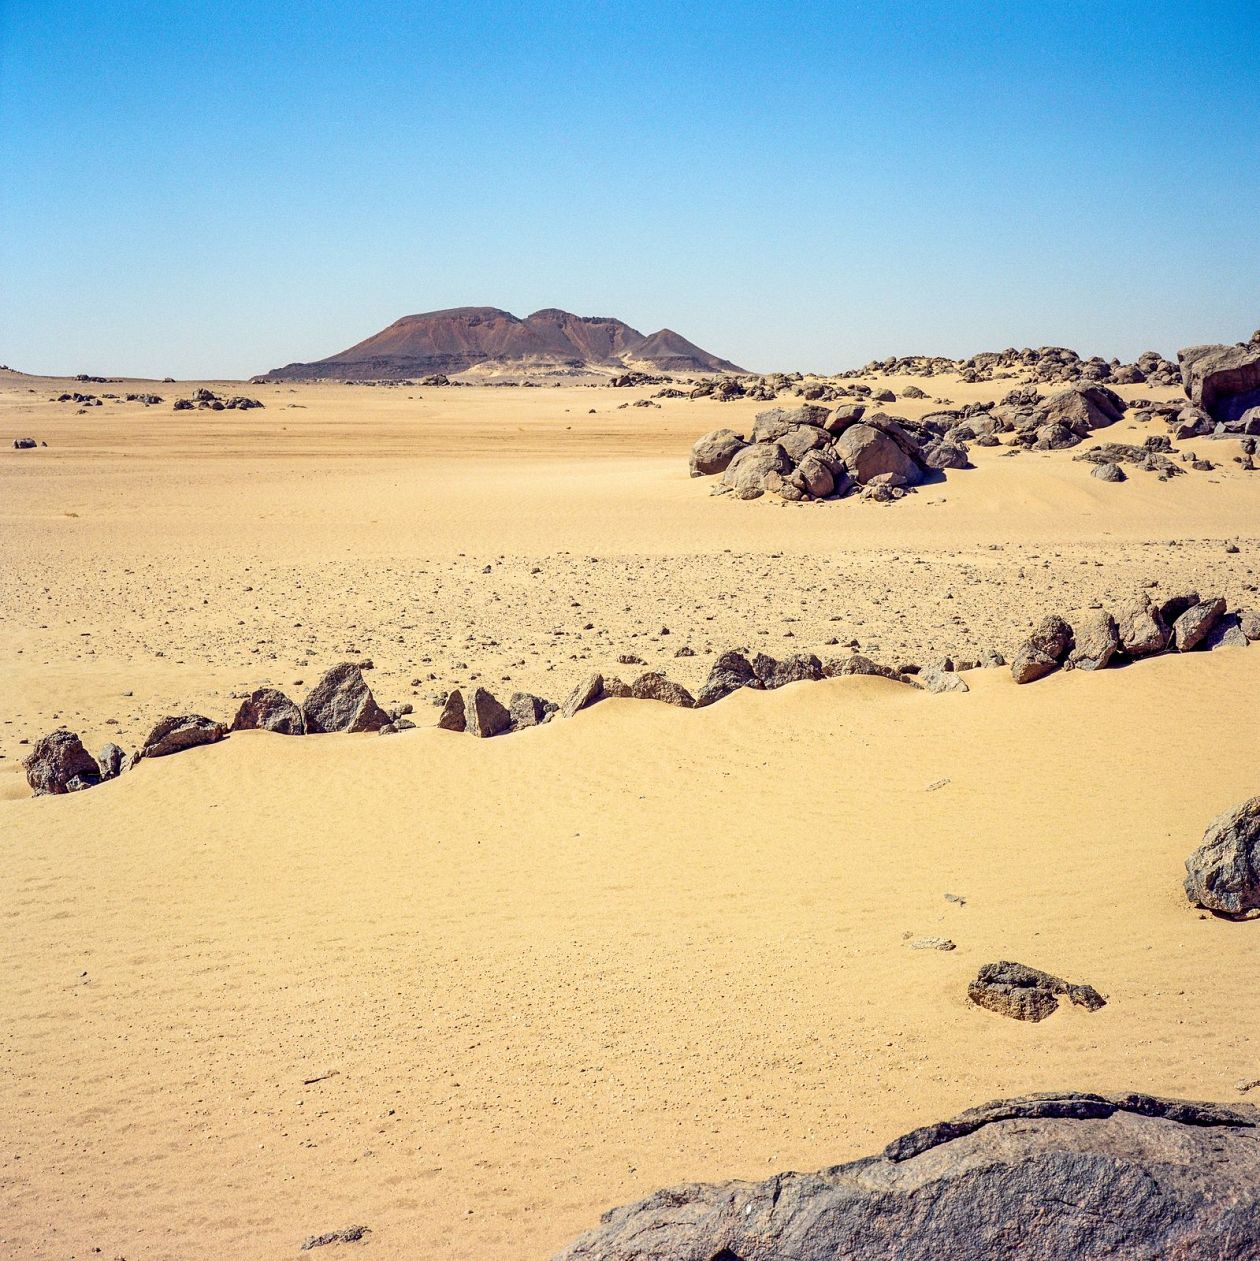 in the middle of the desert rock and sand dune like concept of wild and natural, Nubia, Sudan